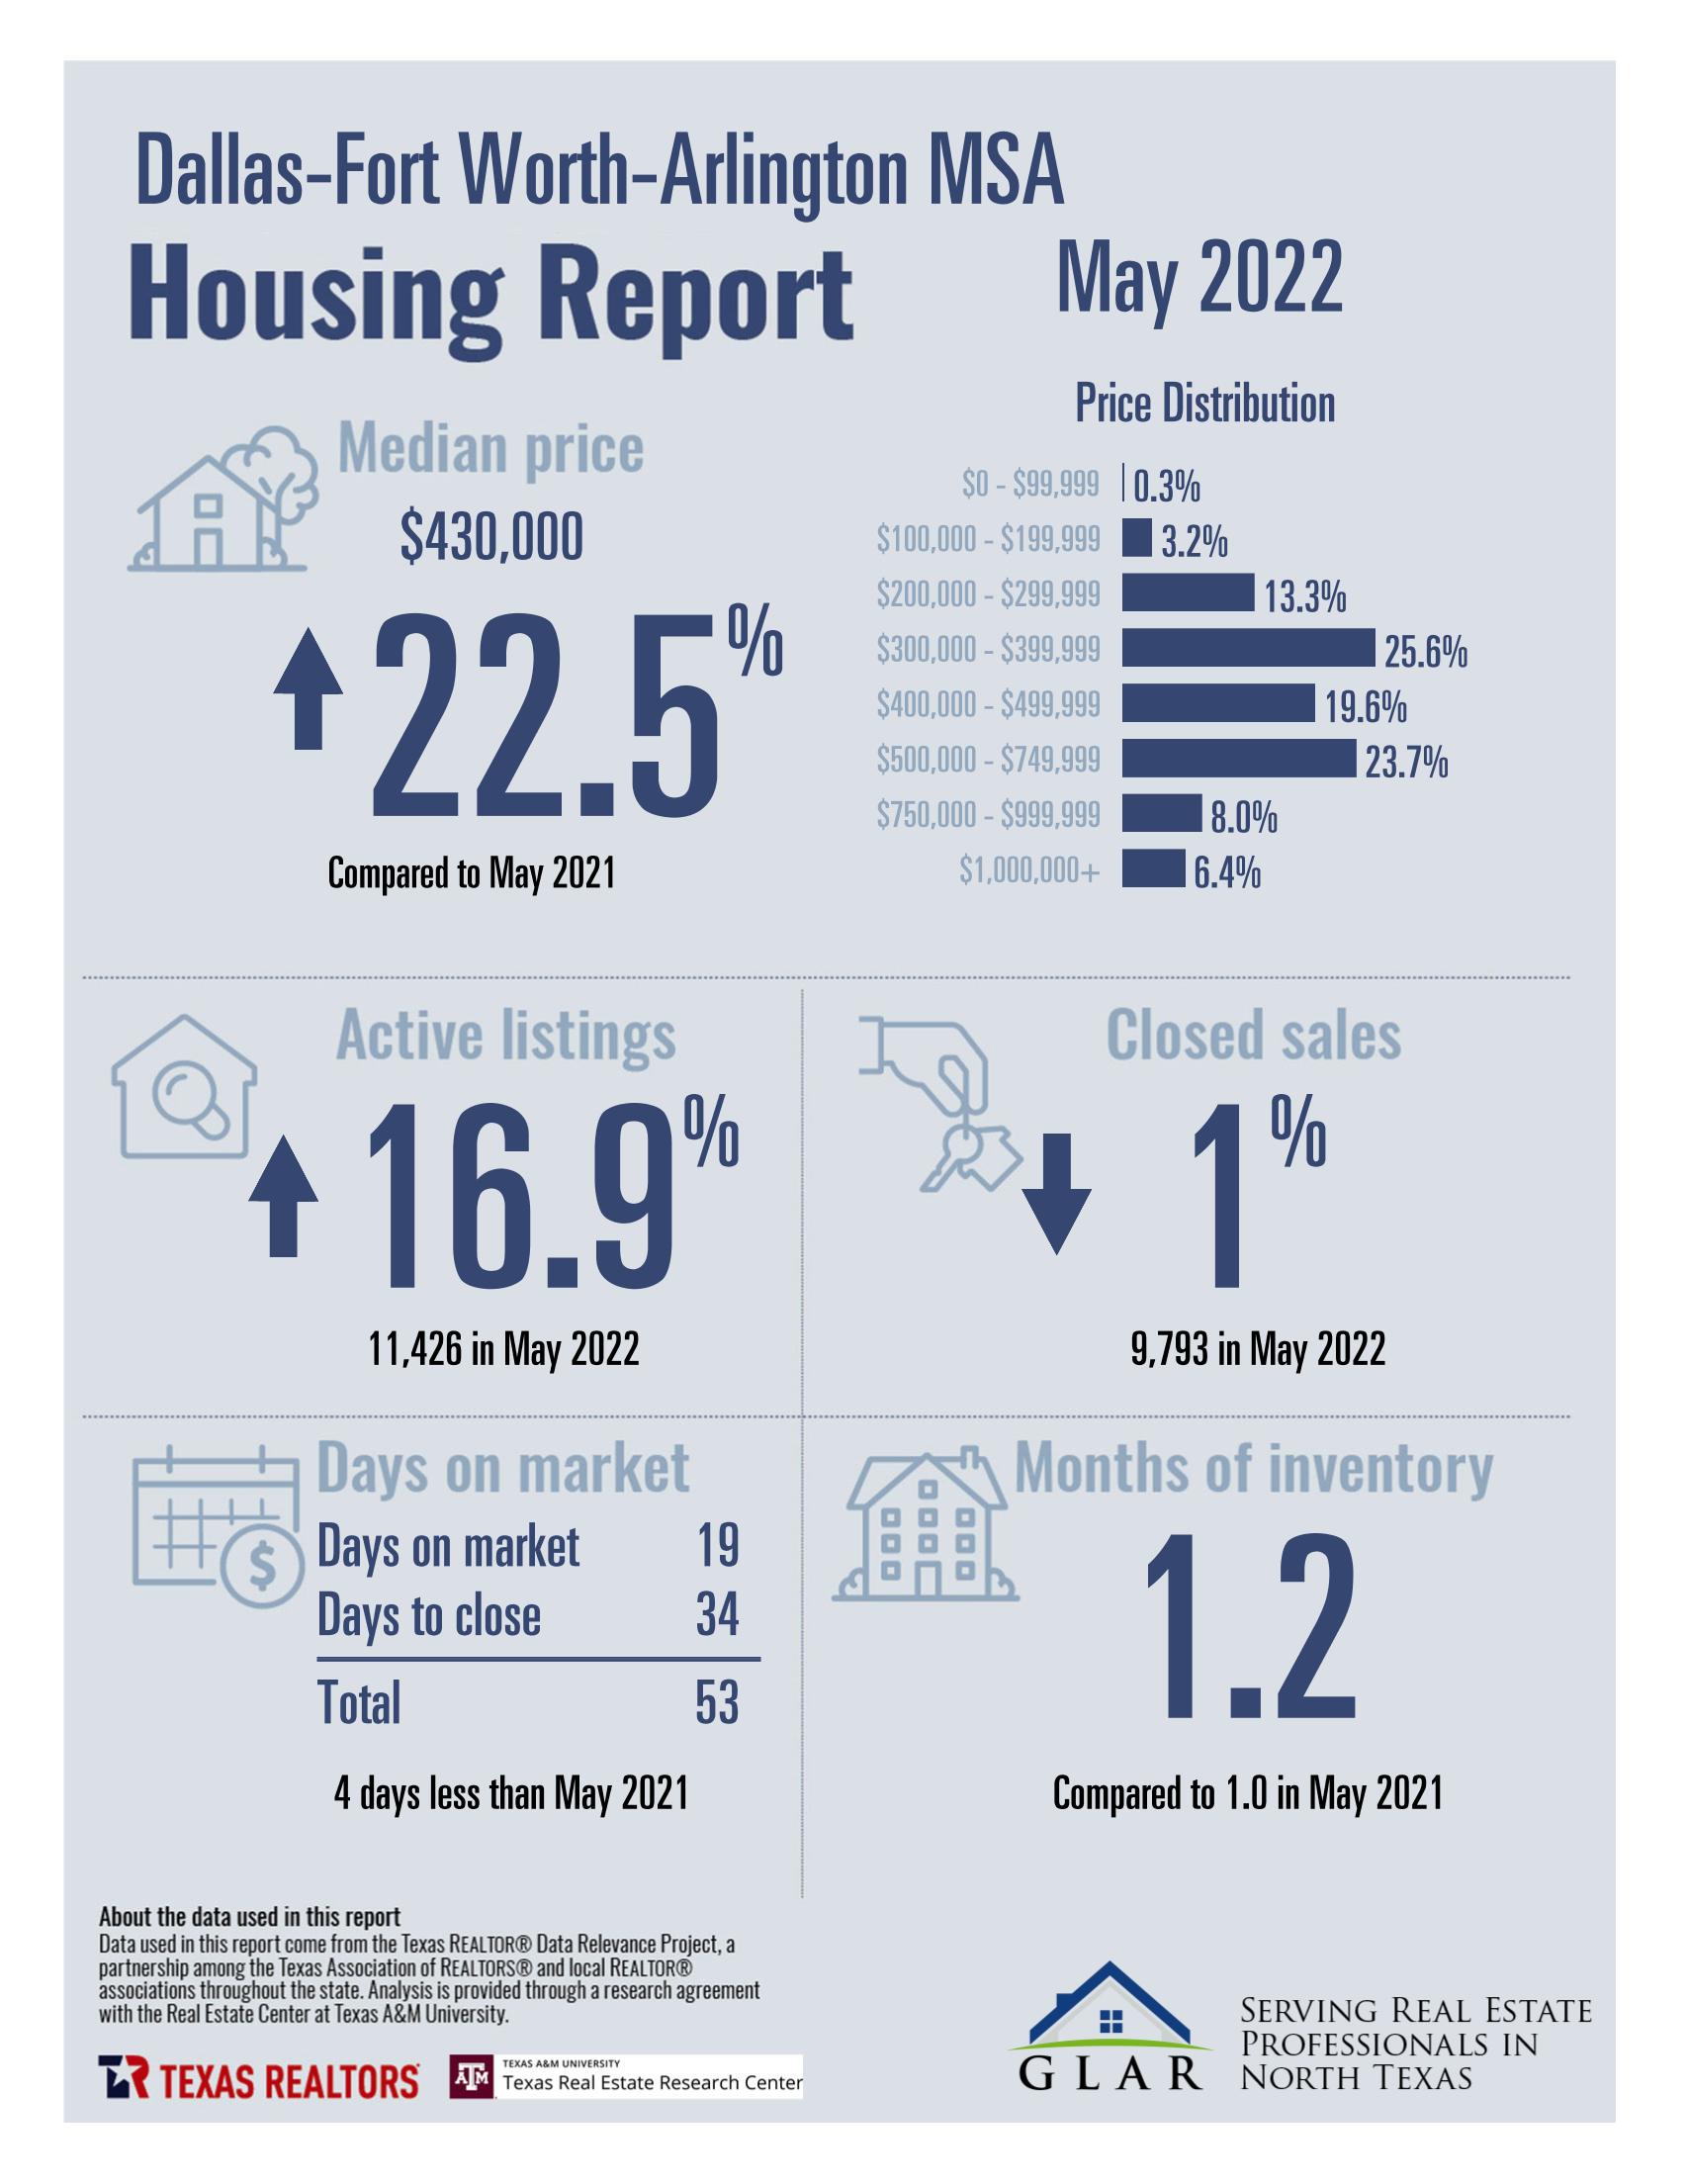 DFW HOUSING REPORT MAY 2022